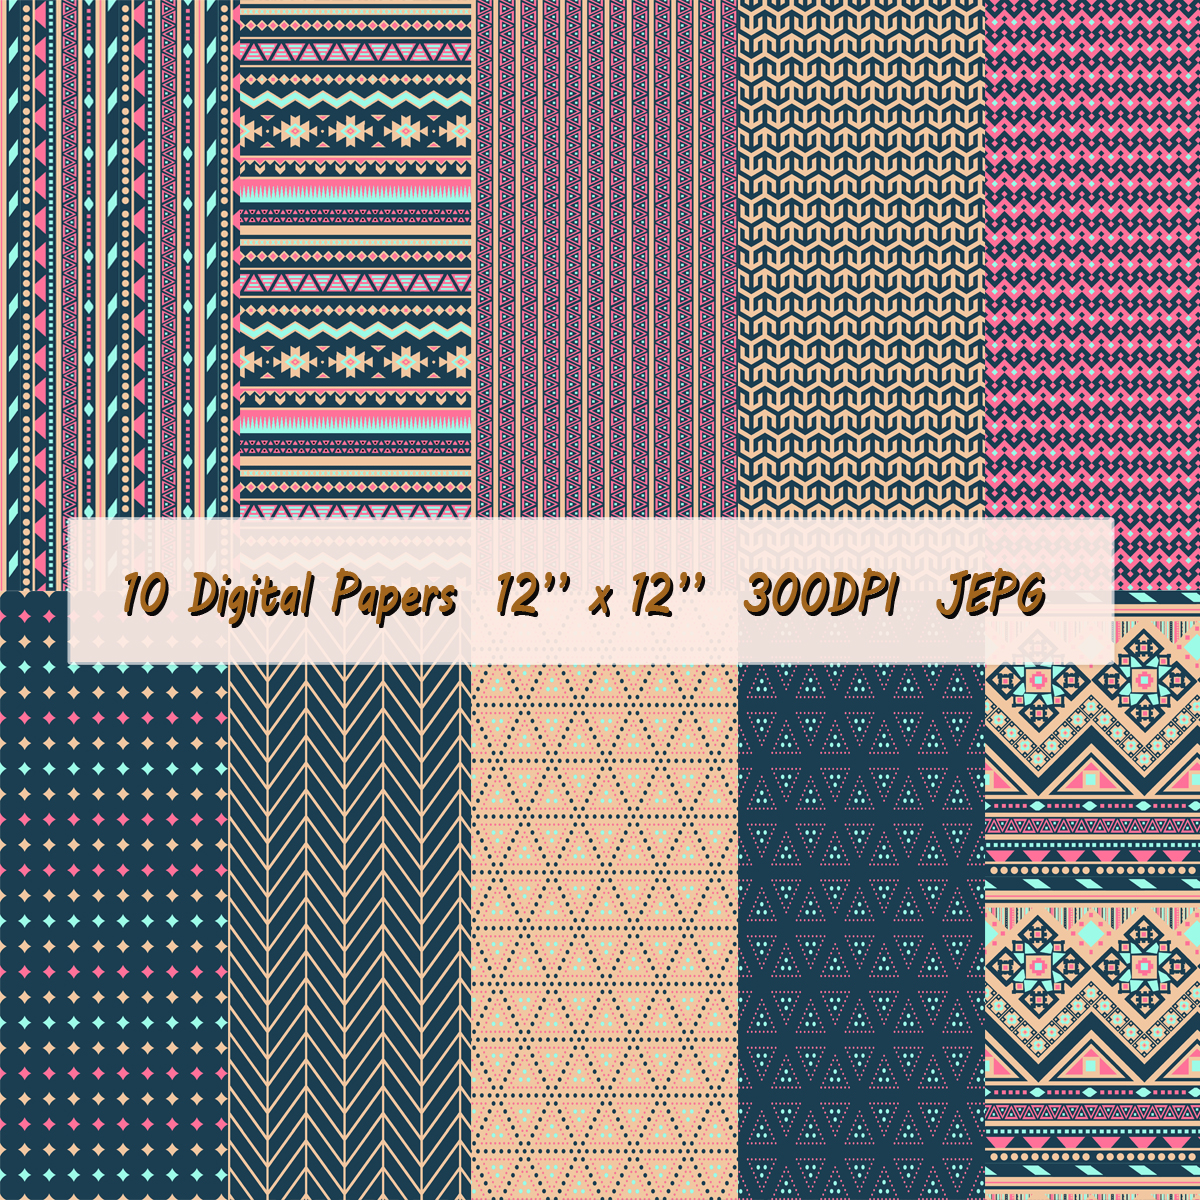 Digital Paper Including Aztec Patterns And Geometric Models In Vibrant Colors: Pink, Dark Blue And Tan, Background,jpeg